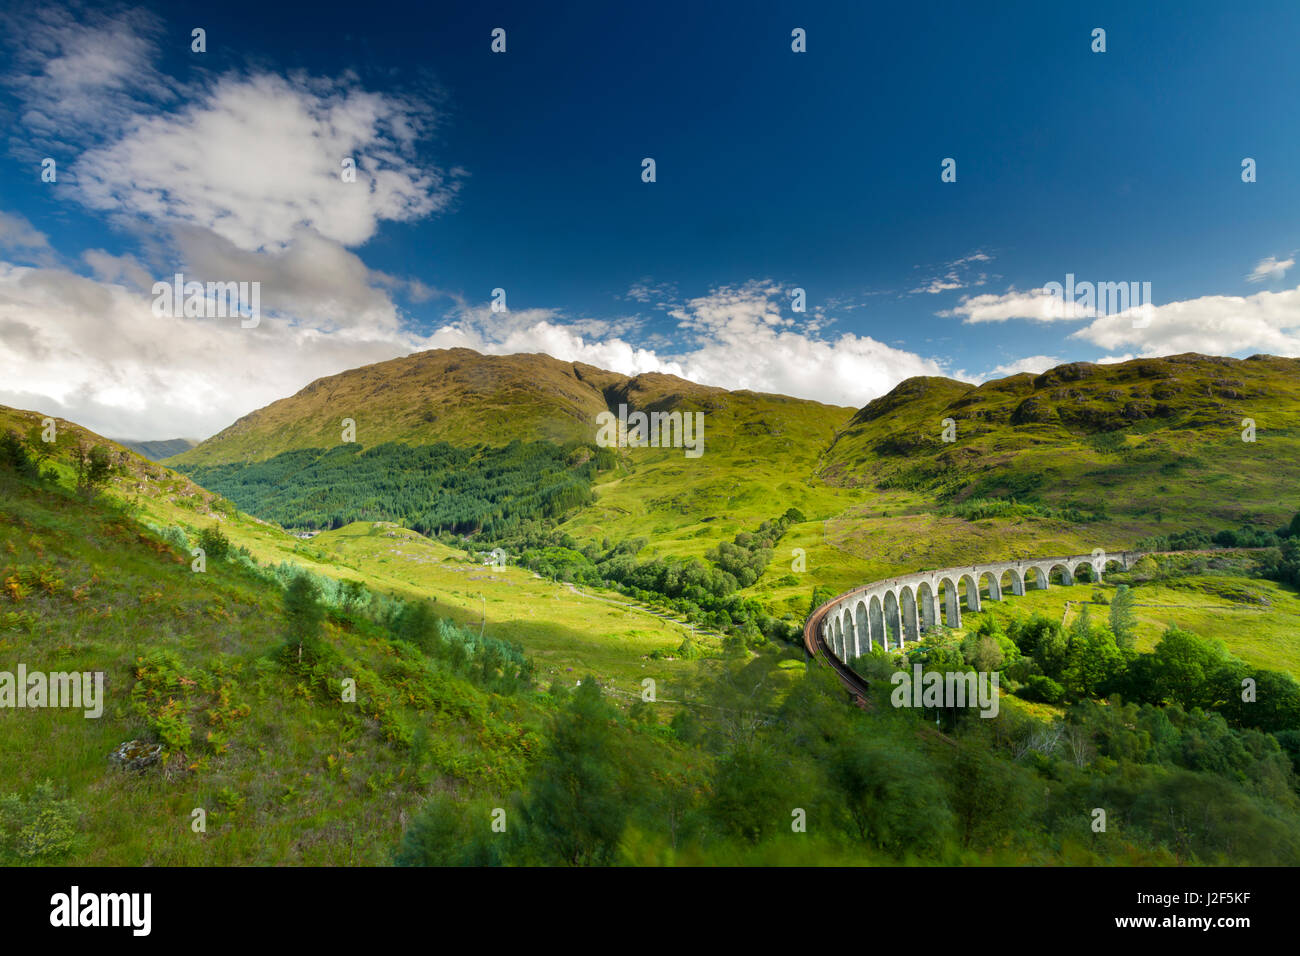 The Glenfinnan Viaduct, built in 1898, is built as single-track railway bridge over the valley and river. The big turn is necessary to lead the train from one hill to another hill The bridge has been used in various films including Harry Potter. Stock Photo